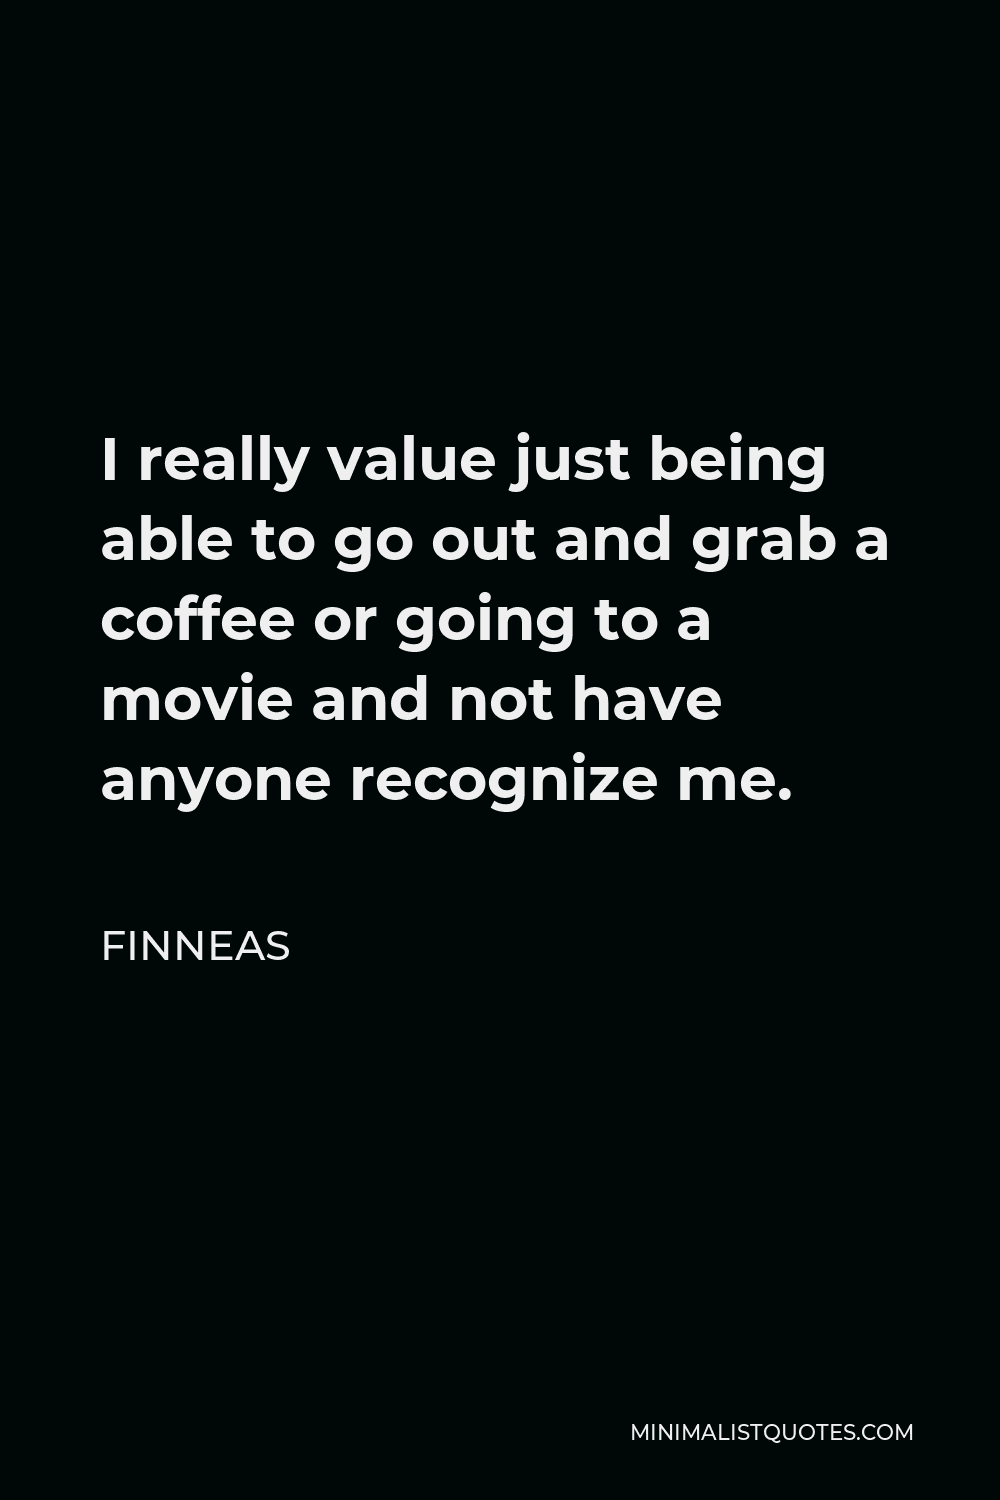 Finneas Quote - I really value just being able to go out and grab a coffee or going to a movie and not have anyone recognize me.